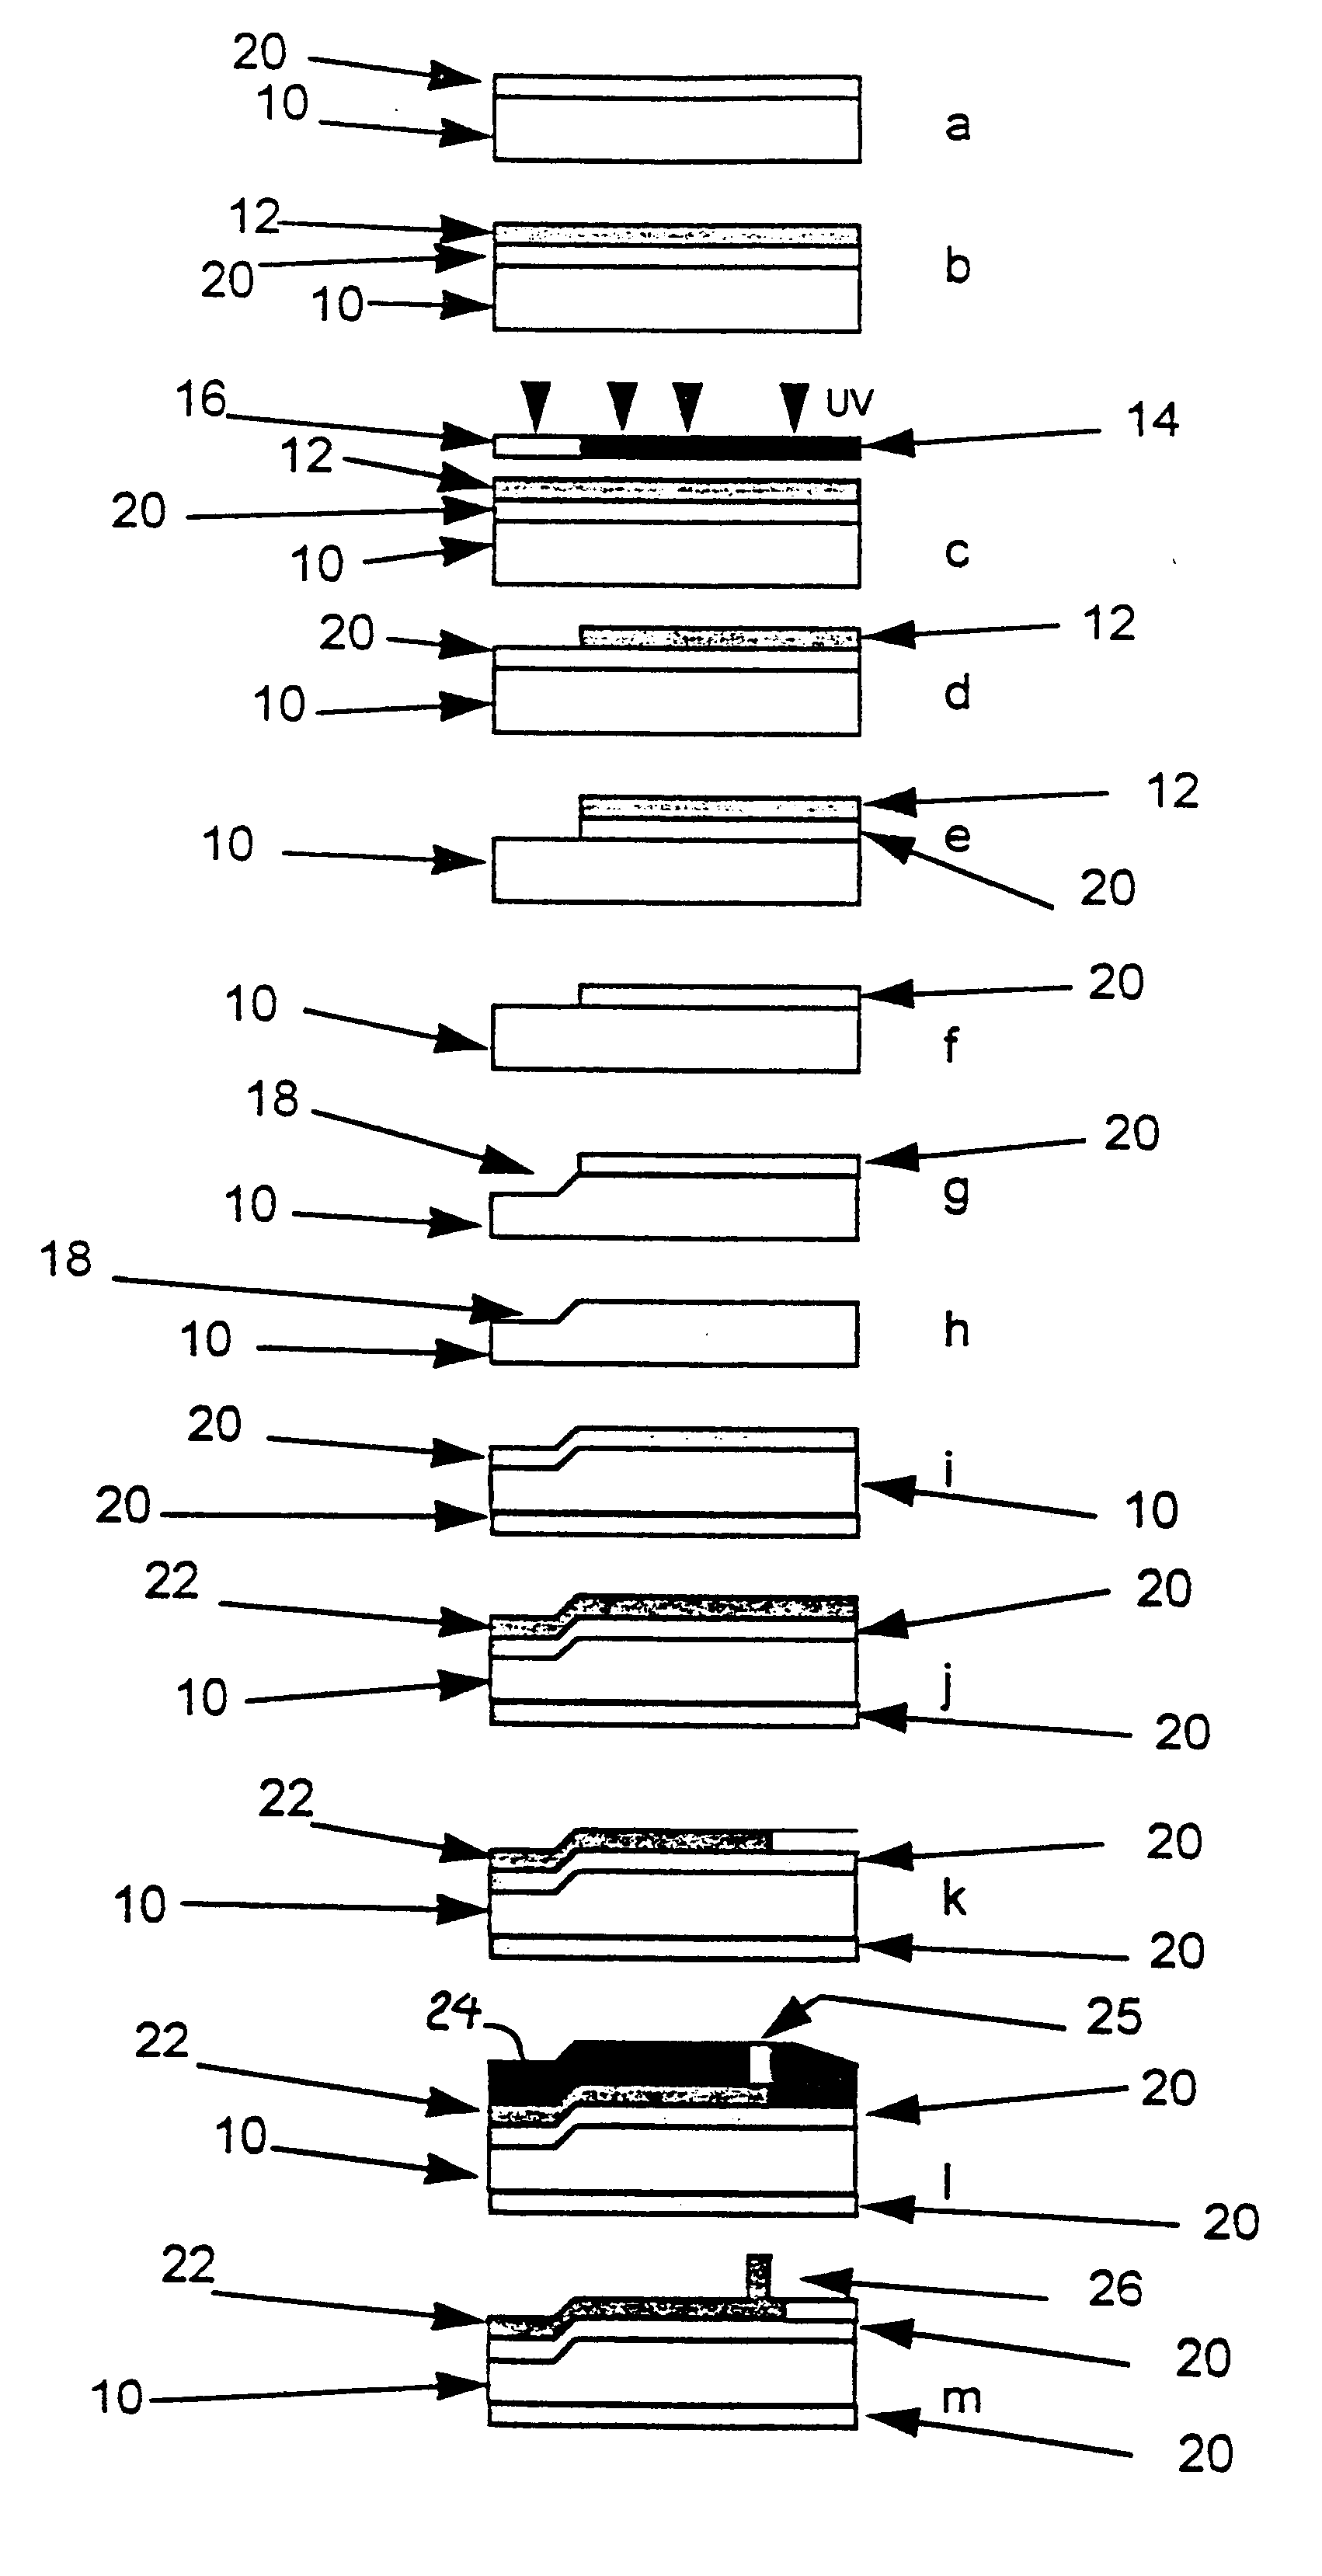 Method for making cards with multiple contact tips for testing semiconductor chips